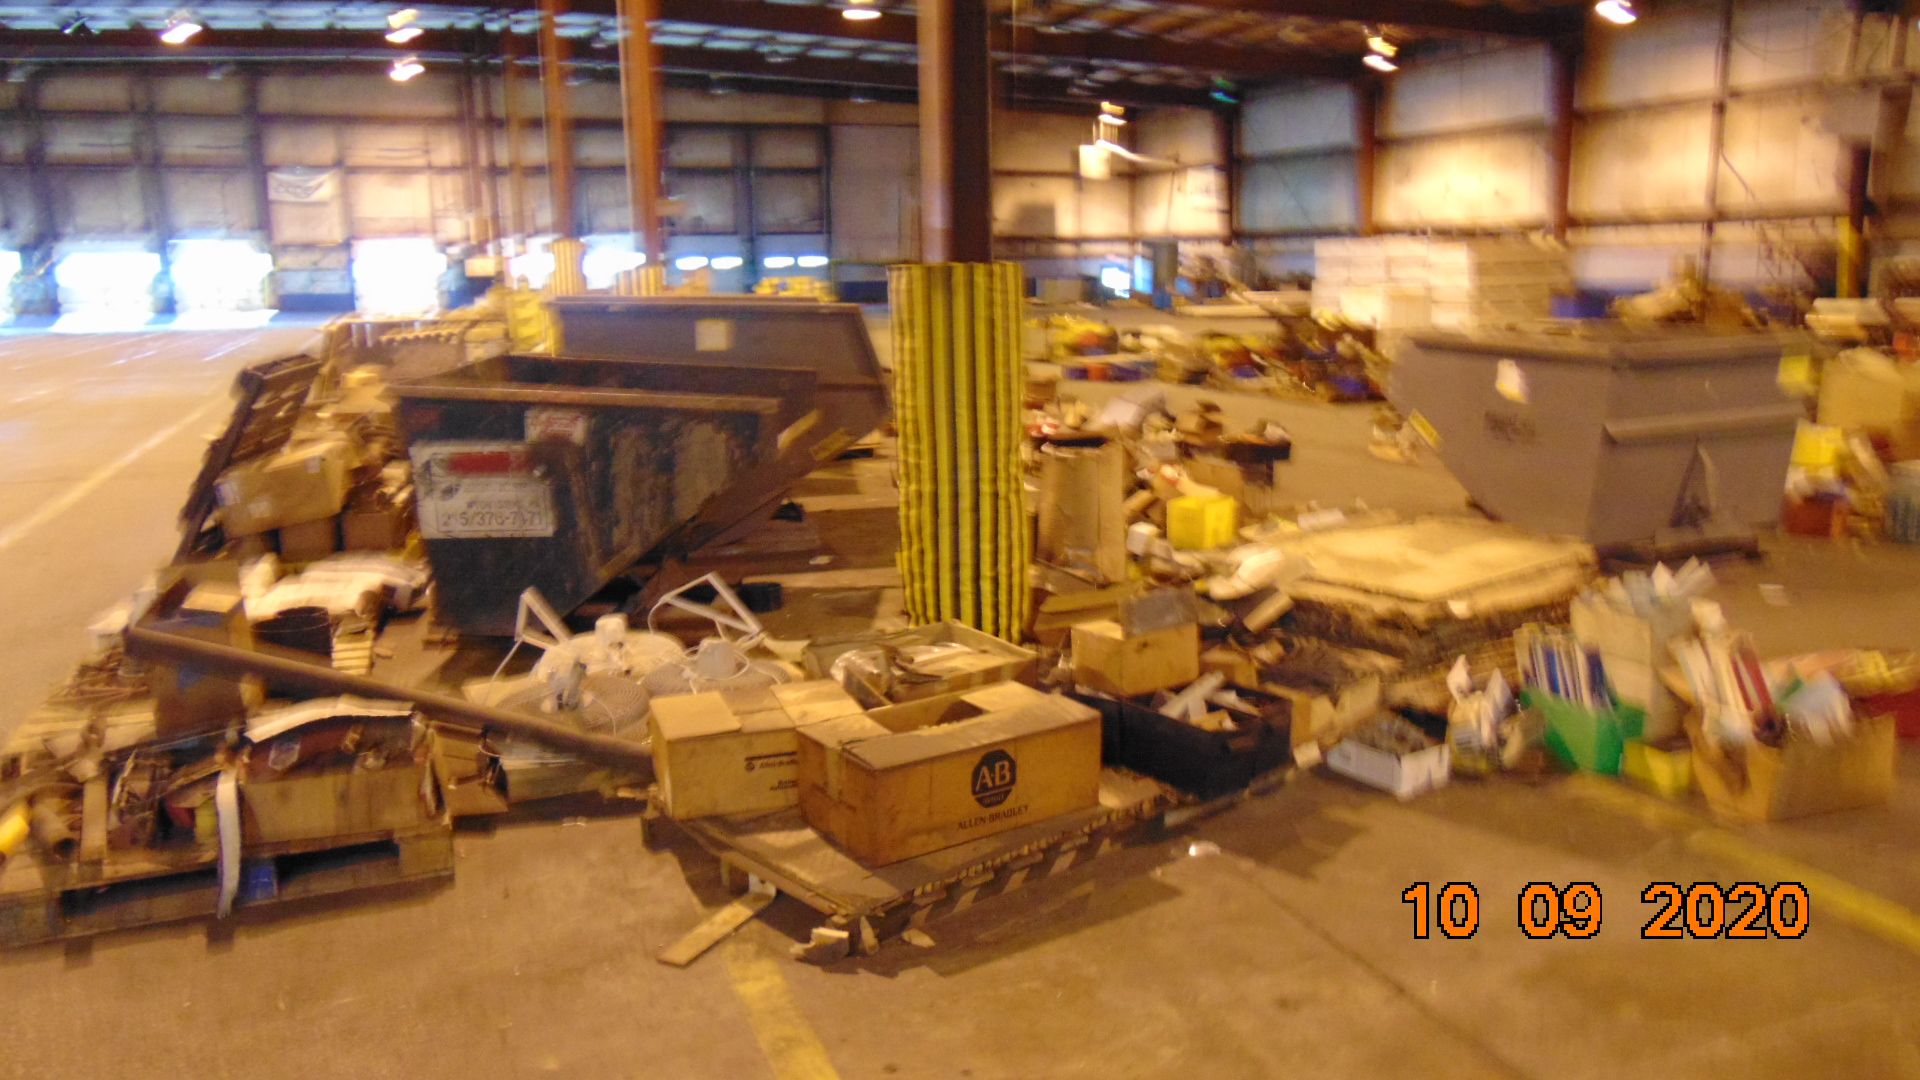 Contents of Warehouse / Industrial Building - Image 16 of 26